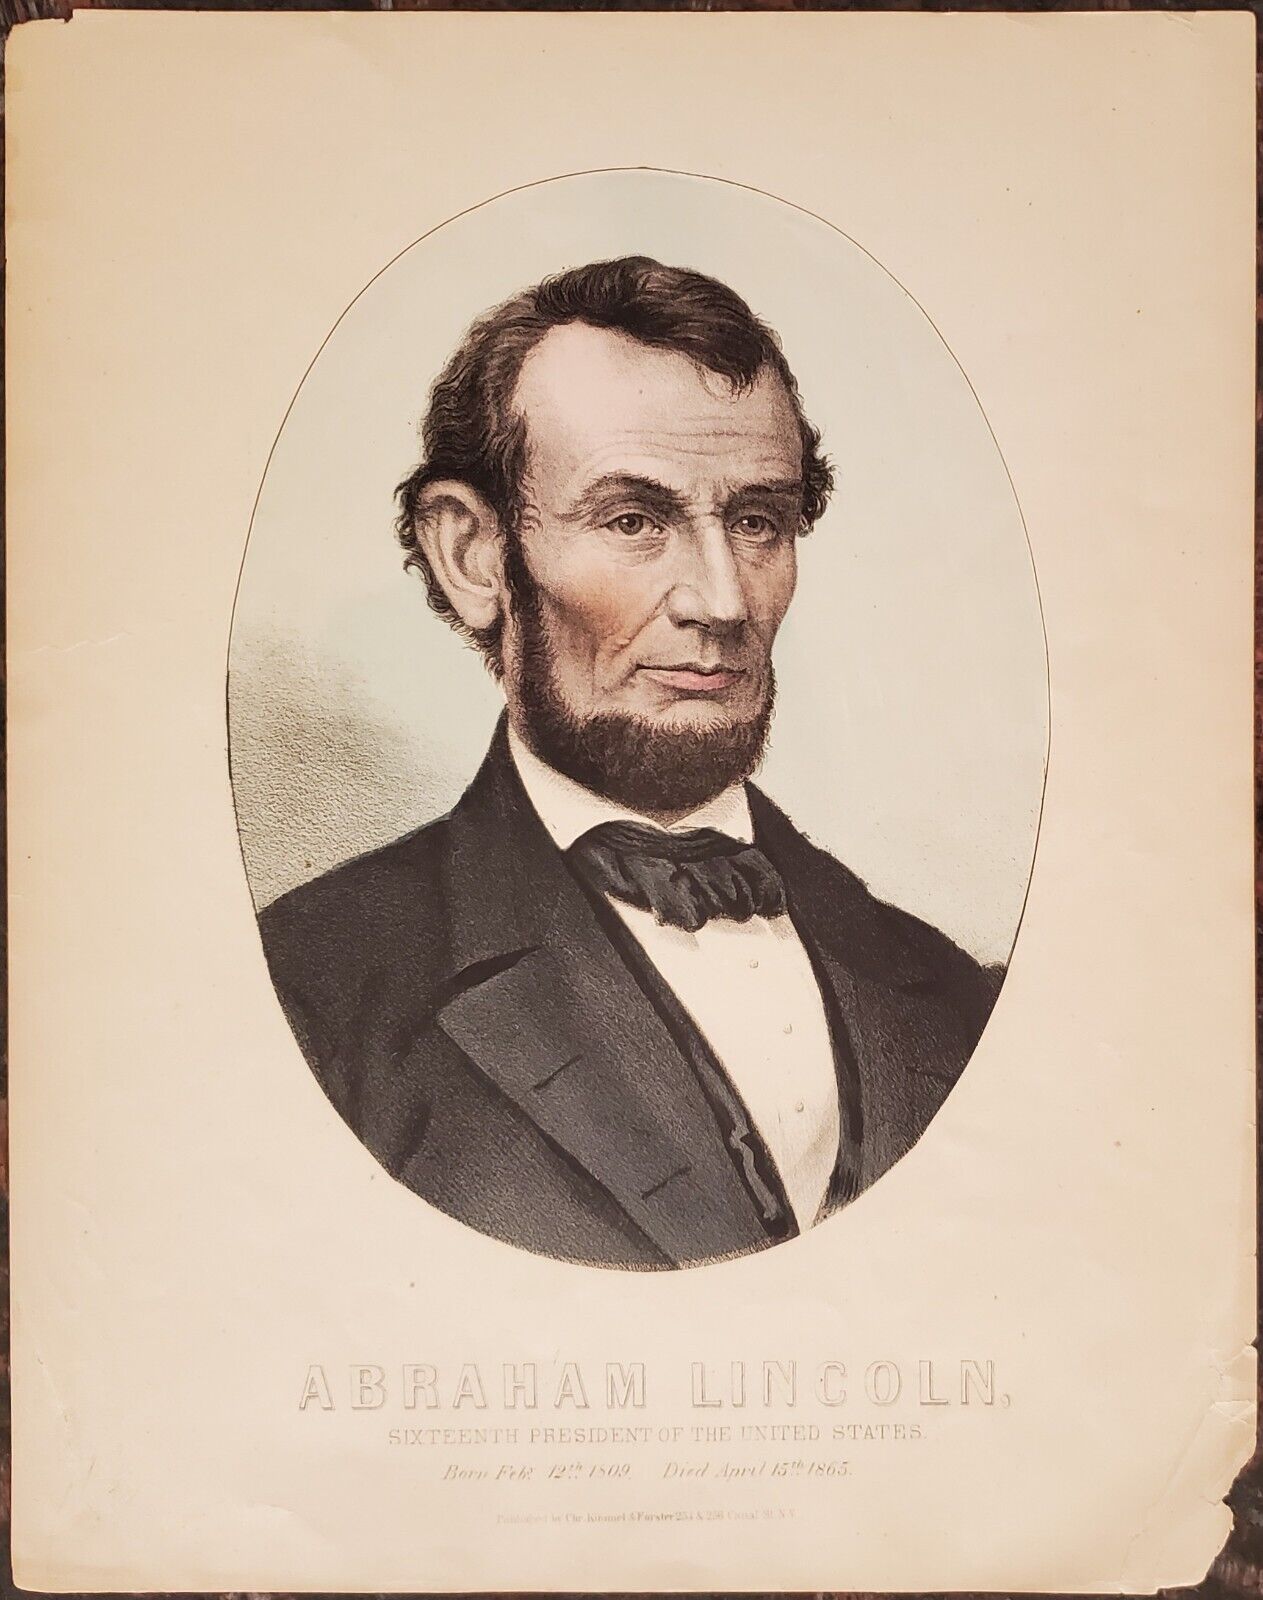 1865 President Abraham Lincoln Color 10x12 Pencil Etching Kimmel & Forster N.Y.